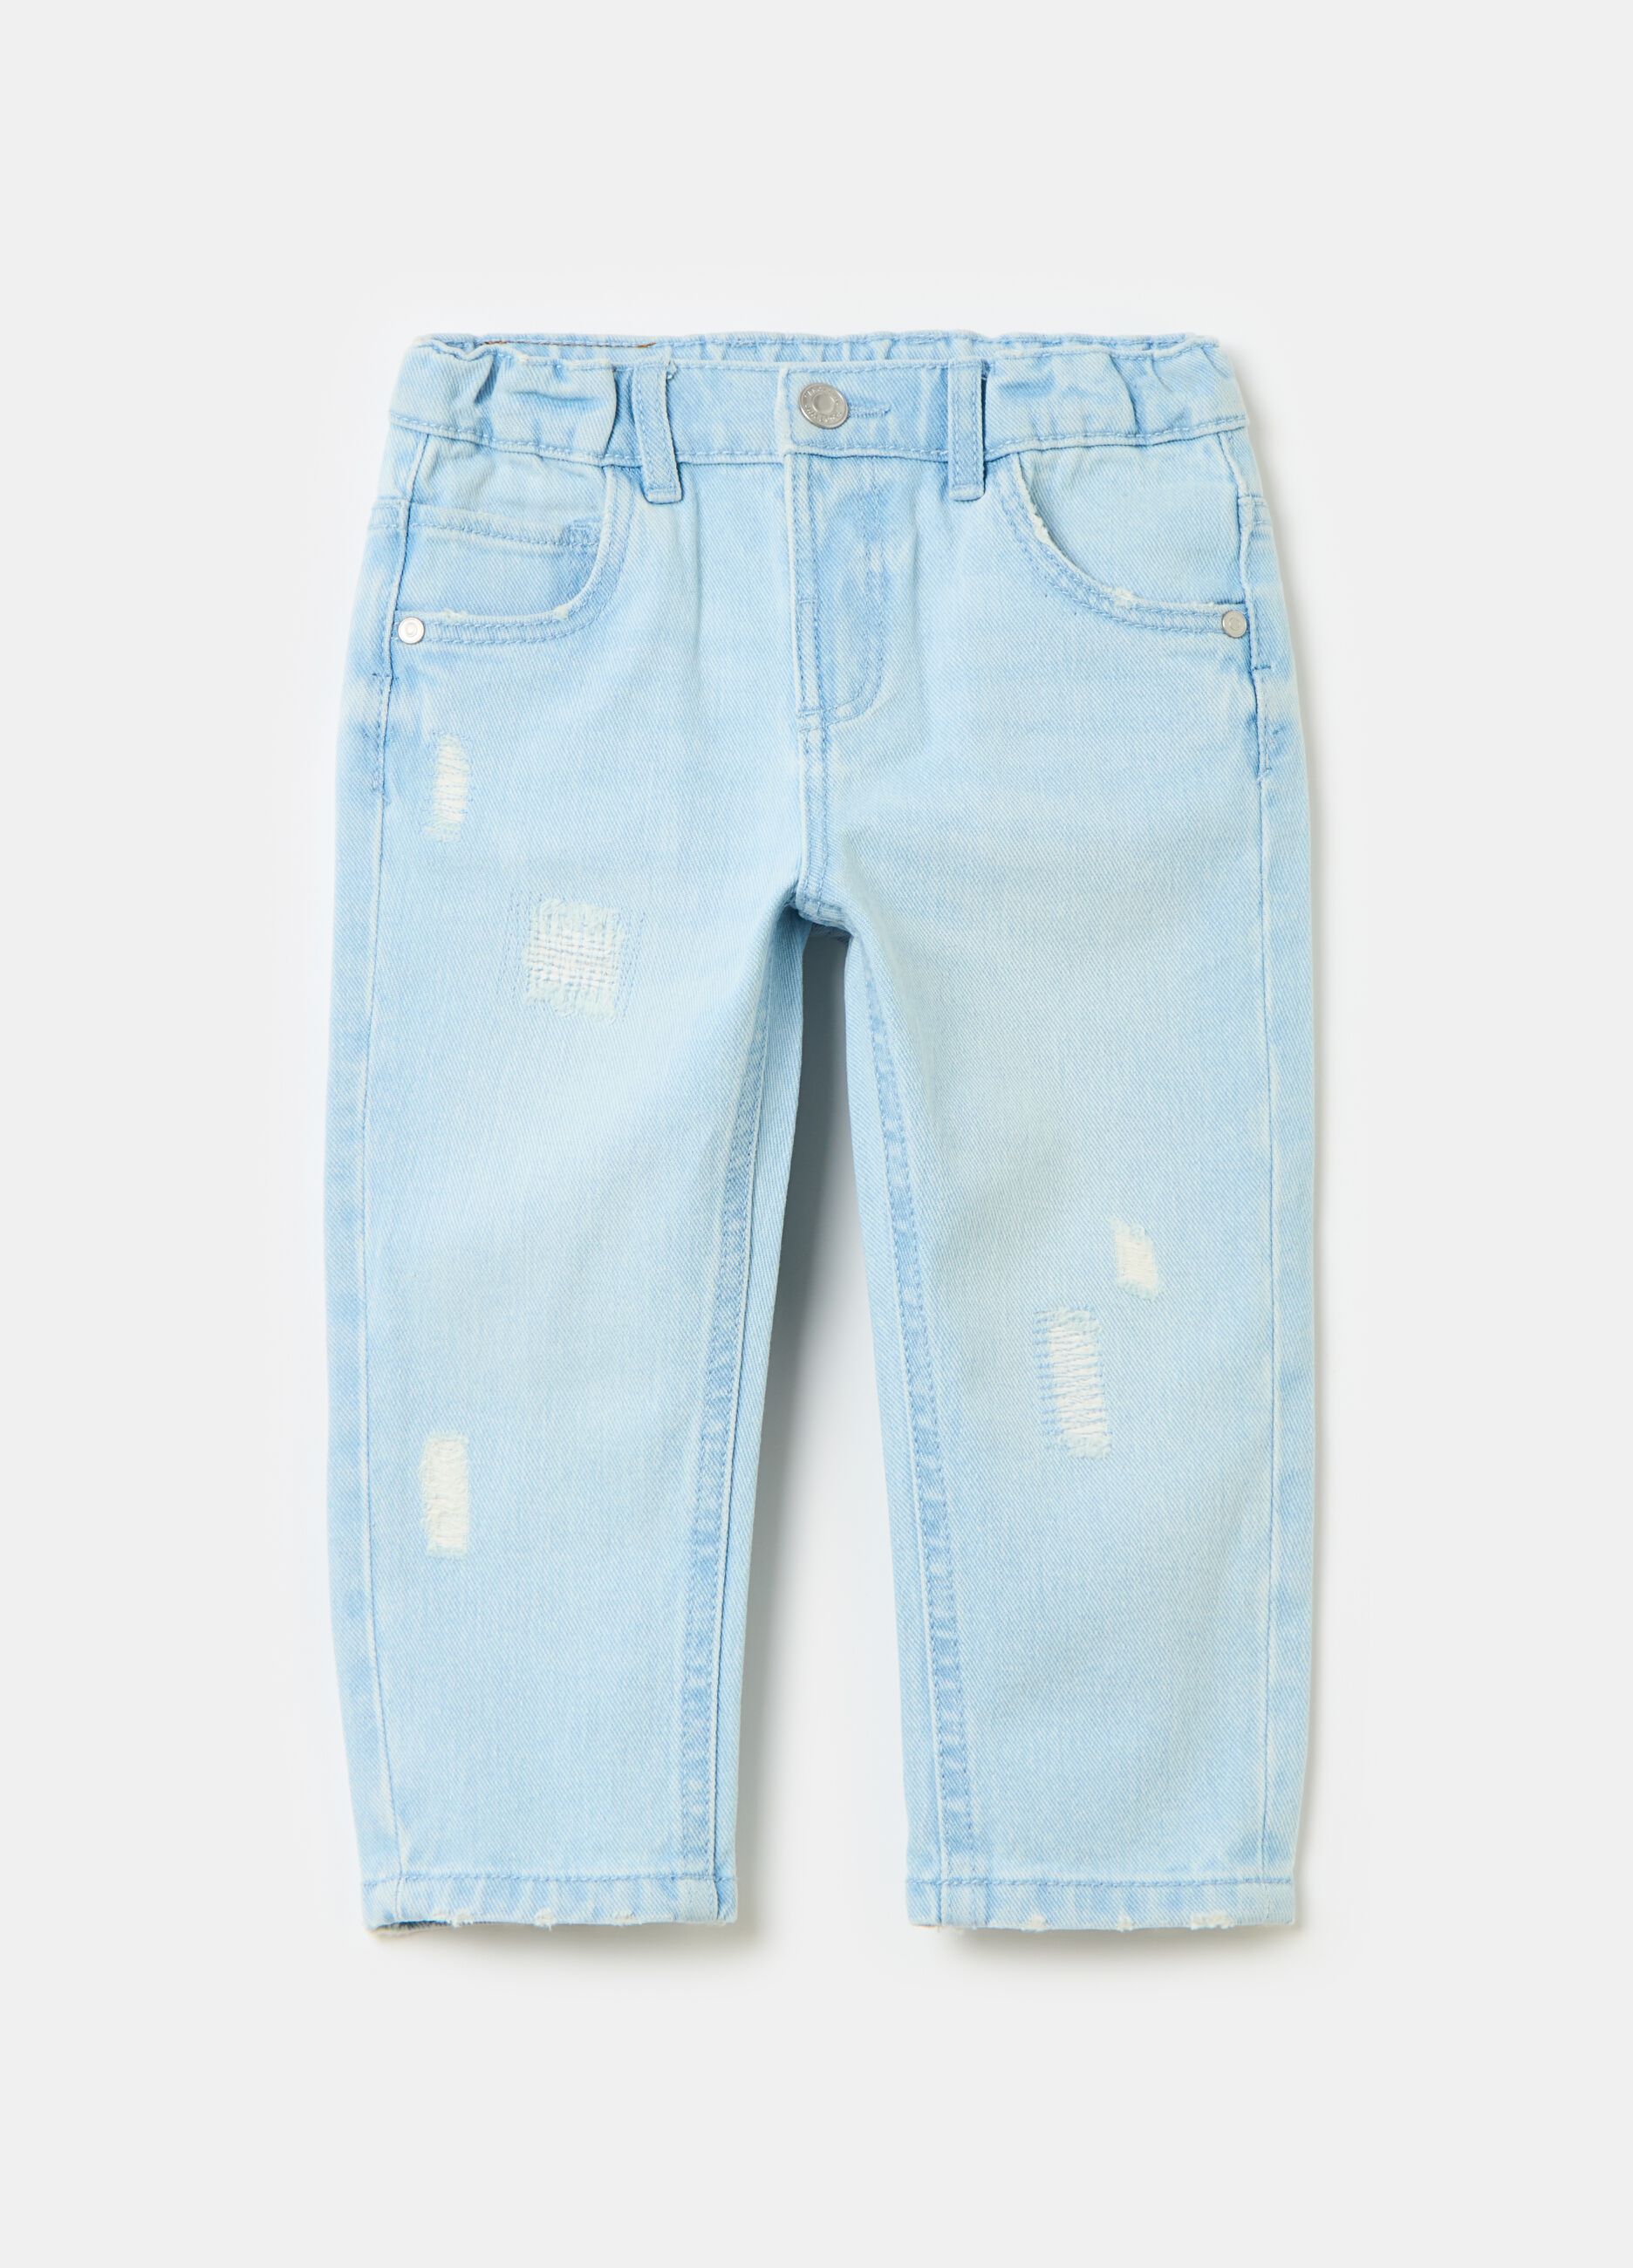 Cotton jeans with abrasions